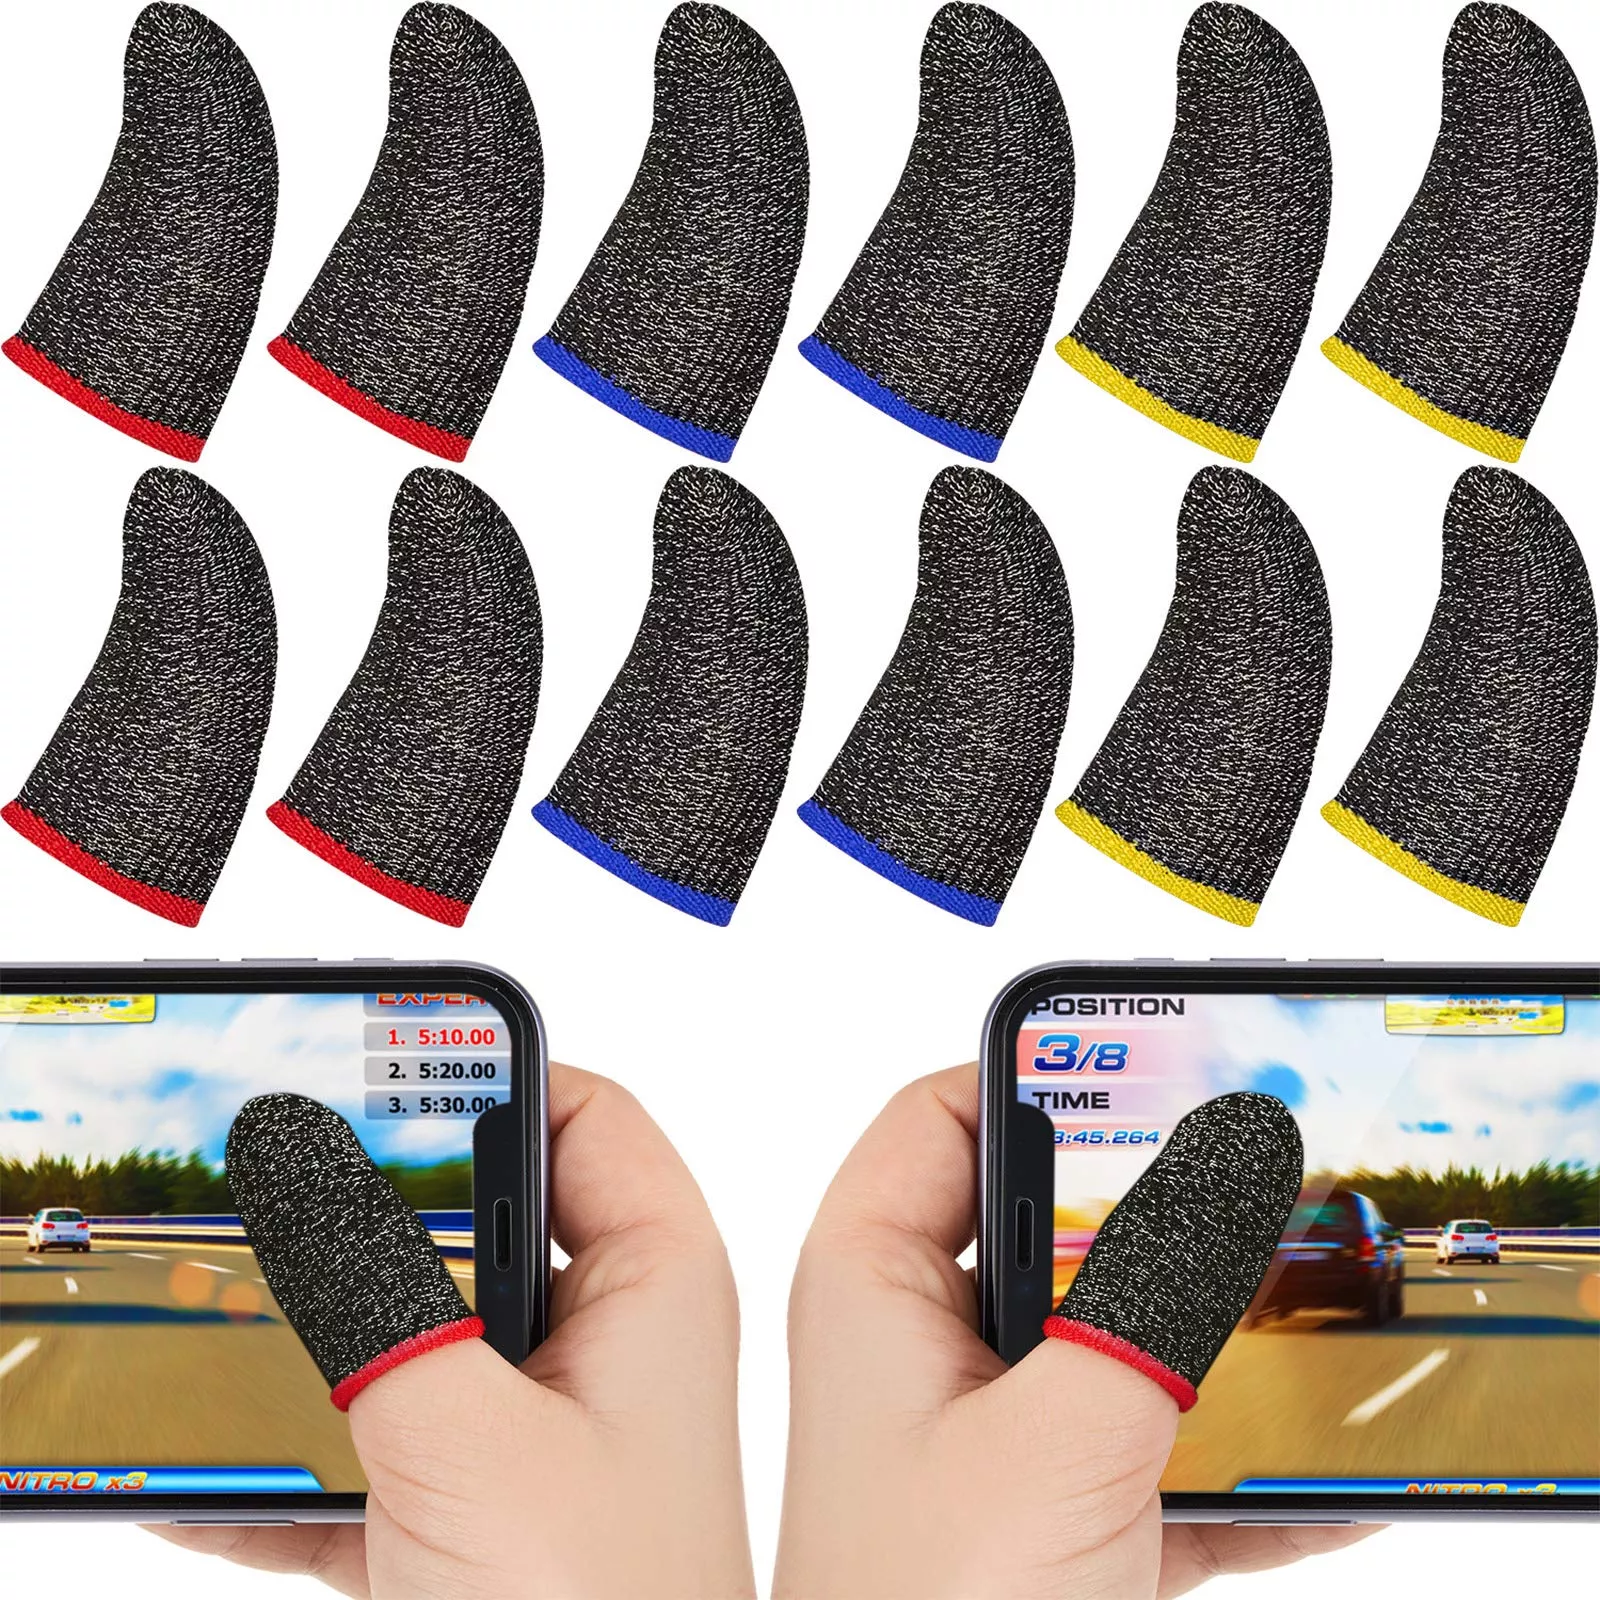 https://www.xgamertechnologies.com/images/products/Gaming Thumb sleeves.webp